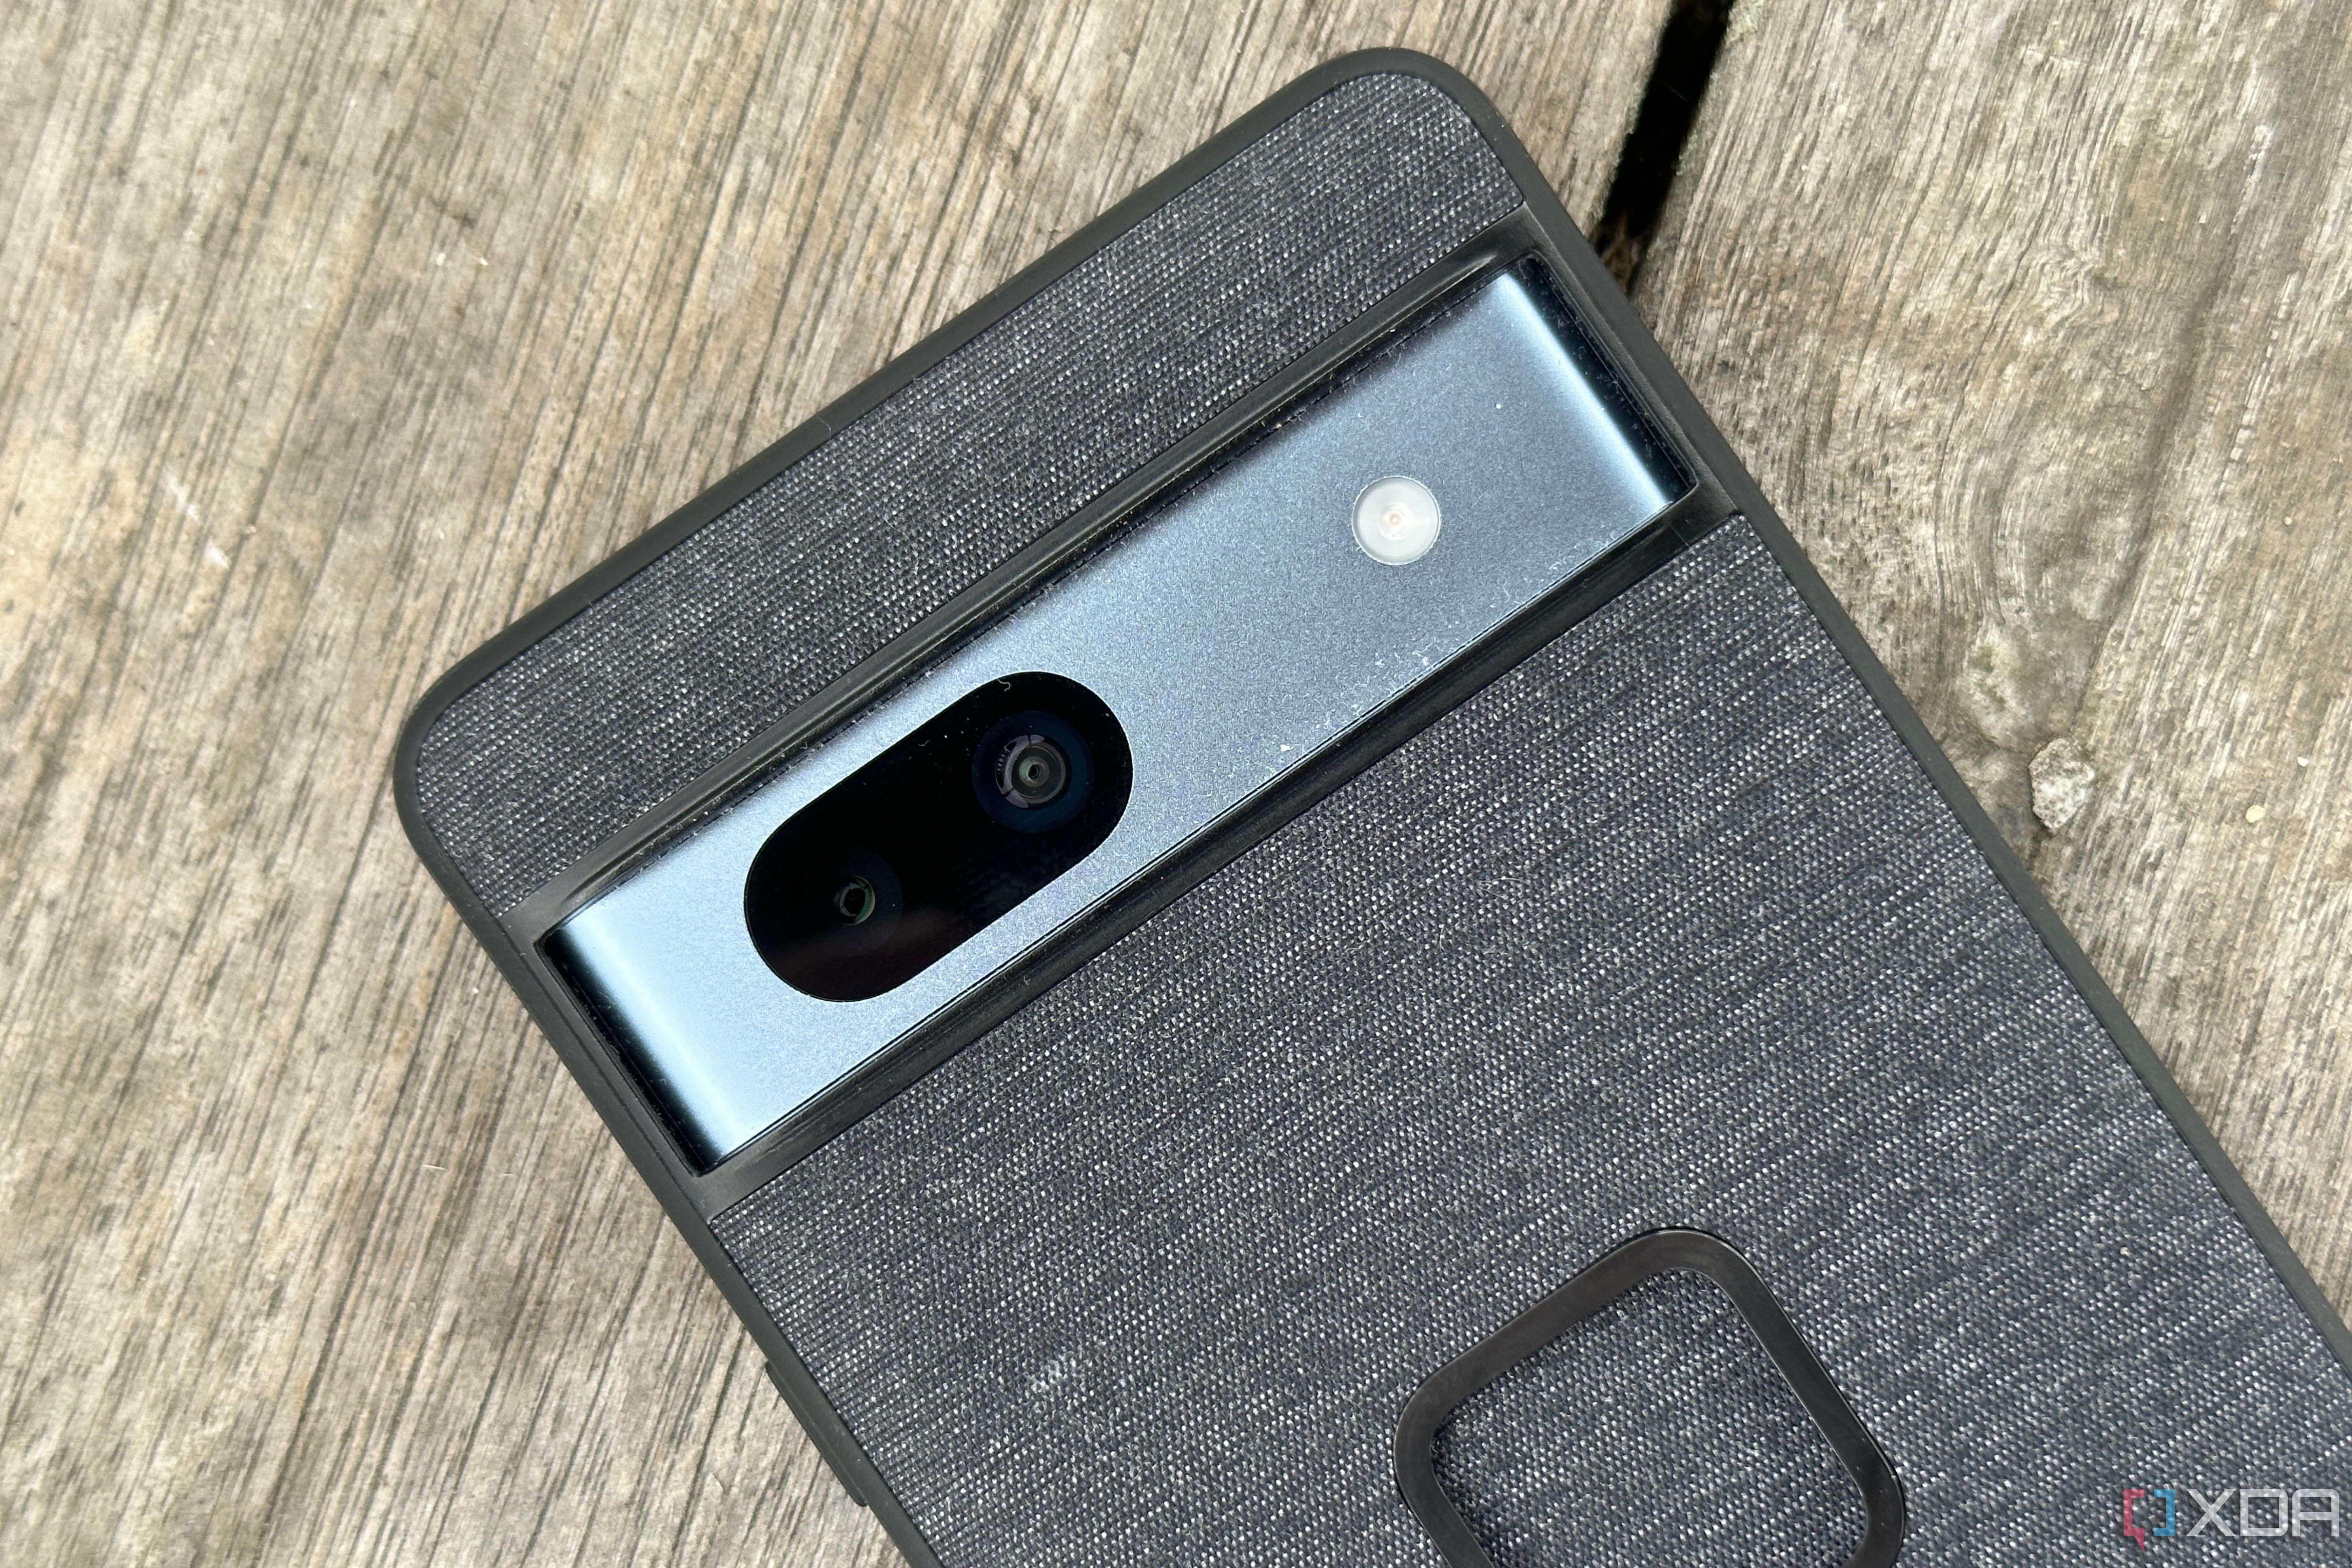 The camera cutout on the Peak Design Everyday Case.